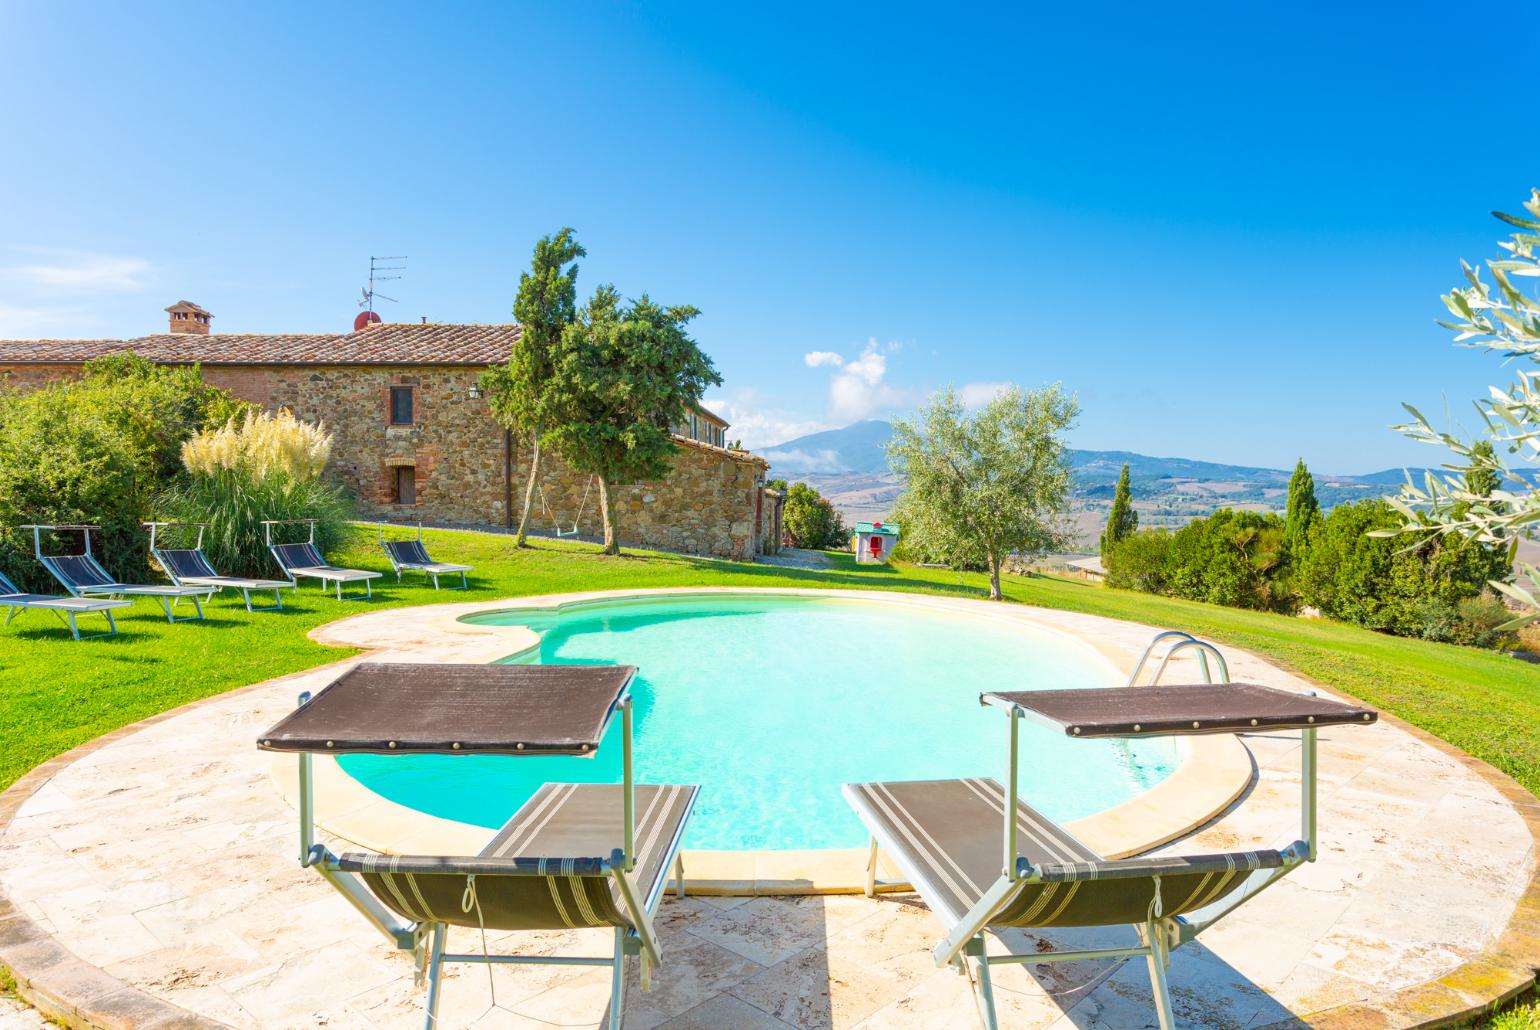 Beautiful villa with private pool, terrace, large lawn, and panoramic Tuscan views